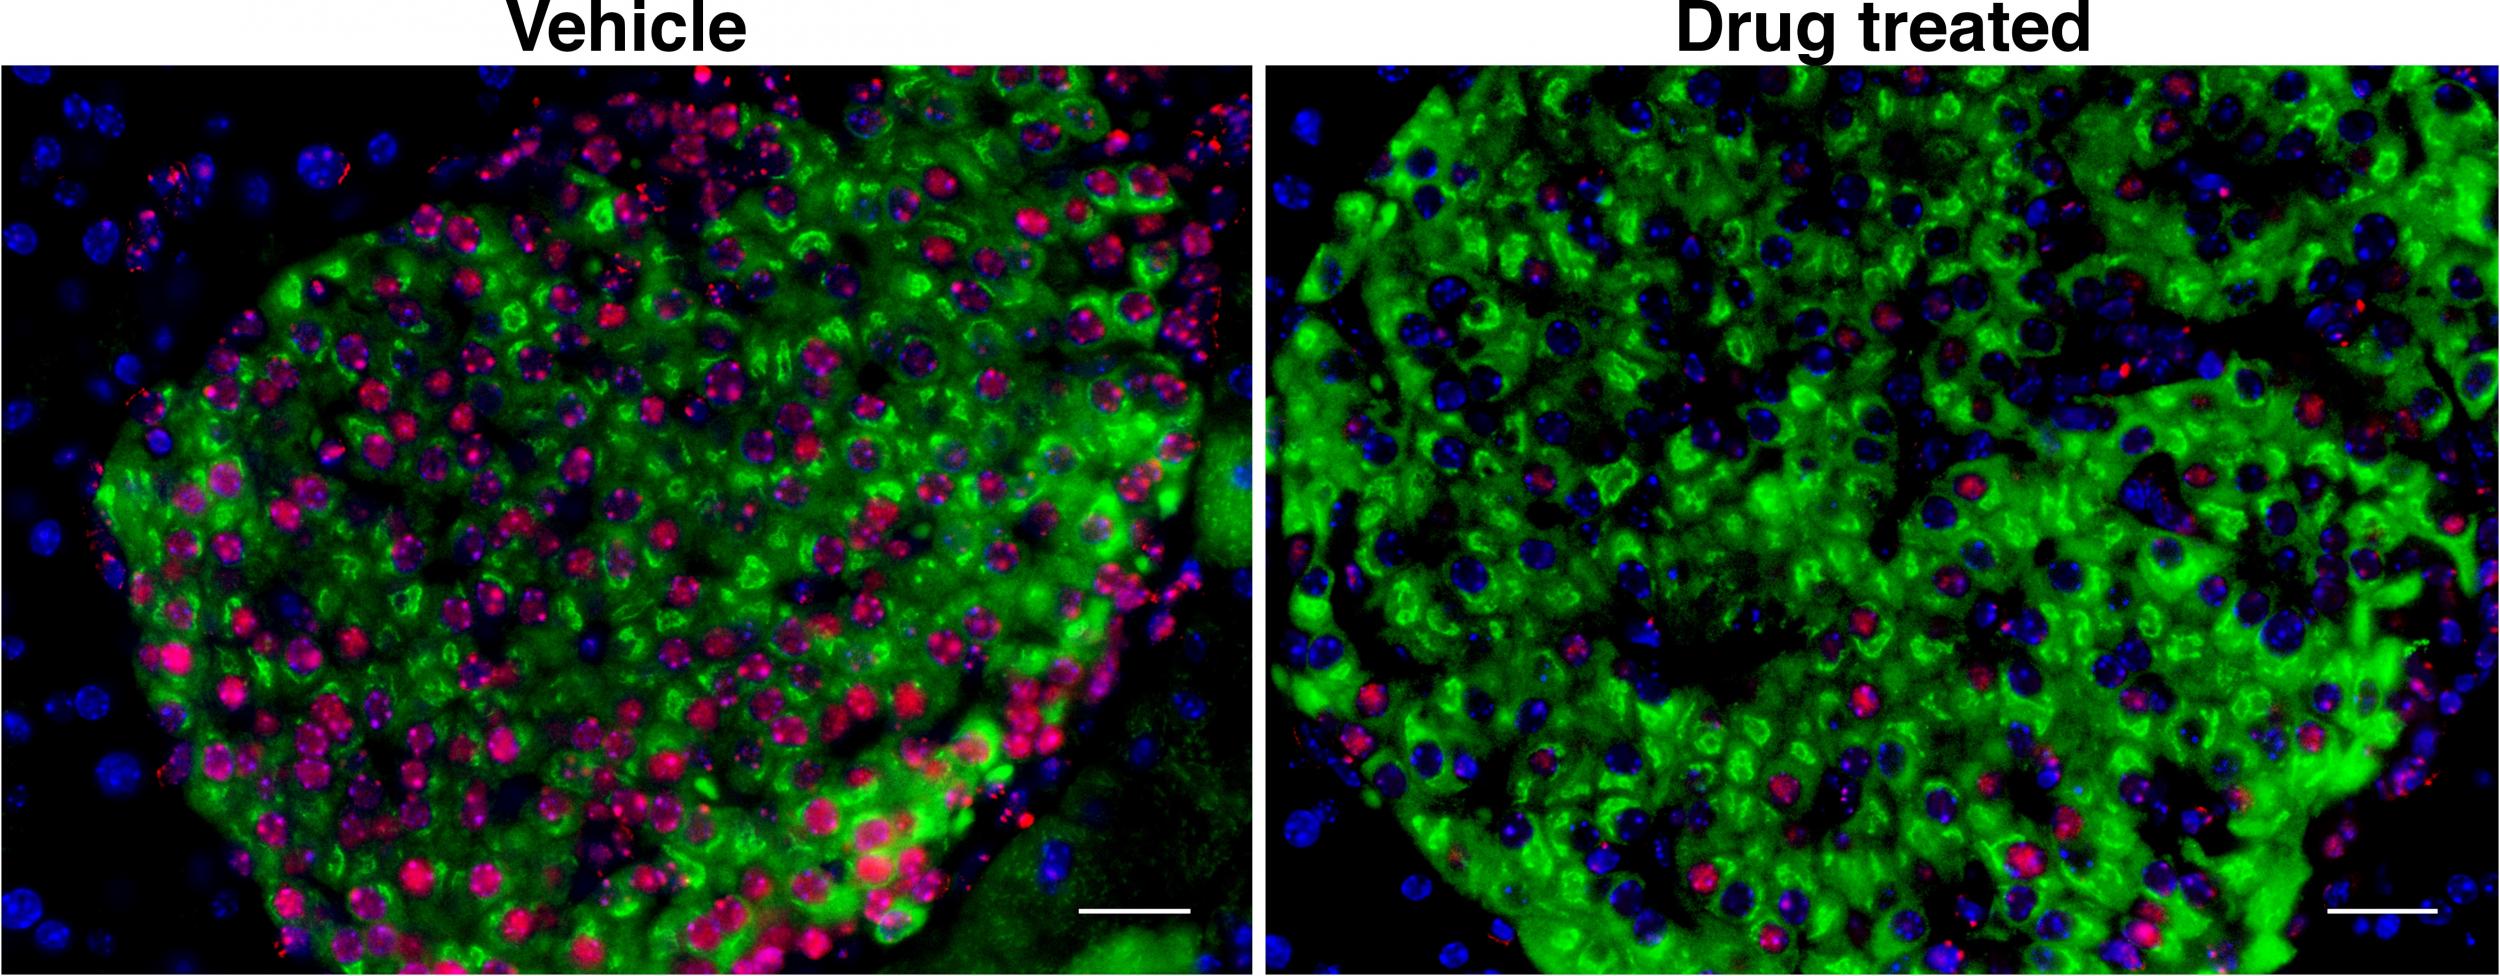 Left: insulin-producing beta cells in the pancreas (green) accumulate DNA damage and become senescent (red), triggering an immune response. Right: pancreatic cells treated with cancer drug that clears senescent cells (Bhushan lab/UCSF)